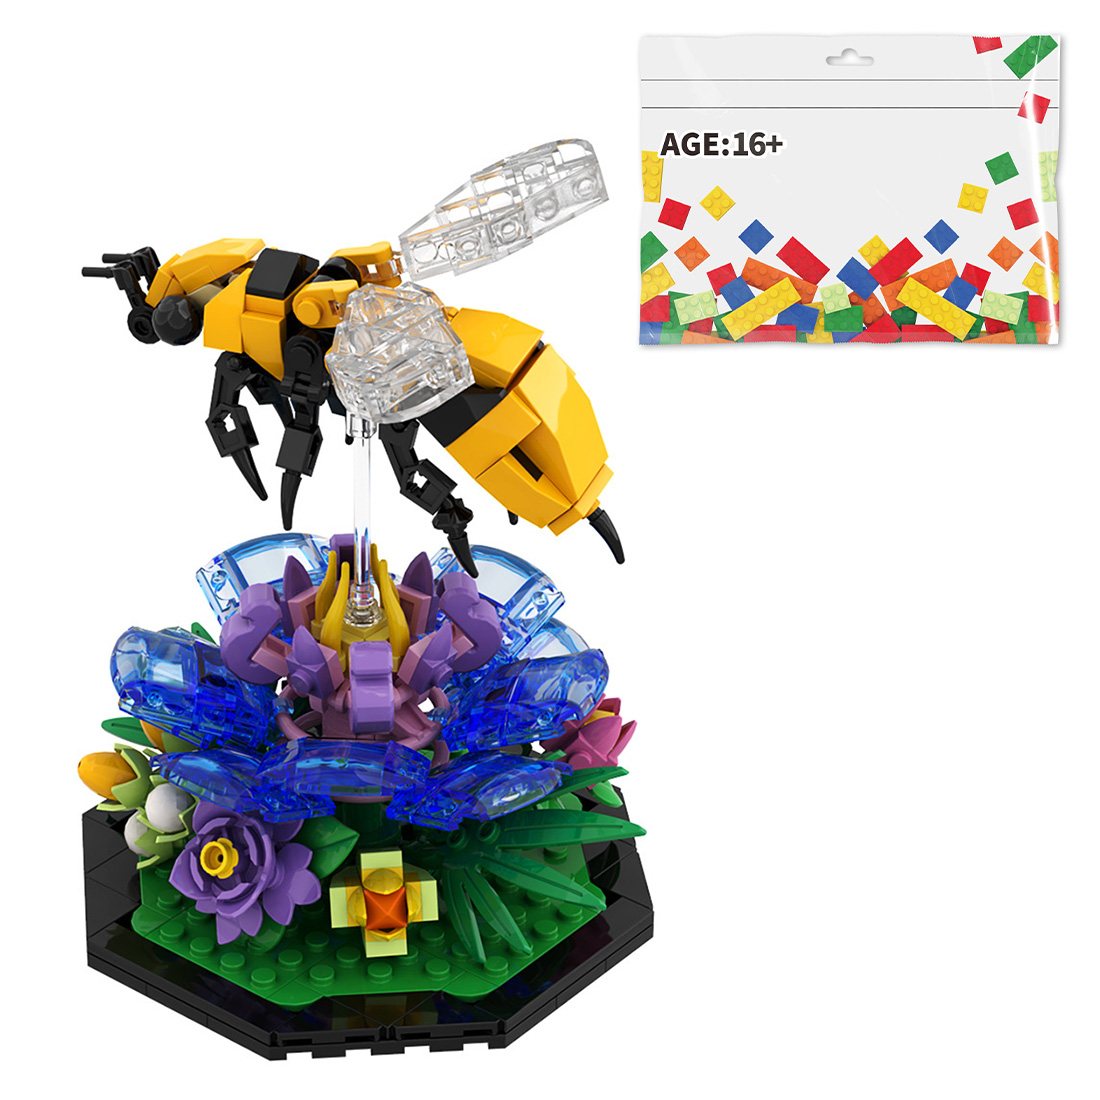 Insect Series - Bee Assembly Model Building Blocks Set Creative Ornament